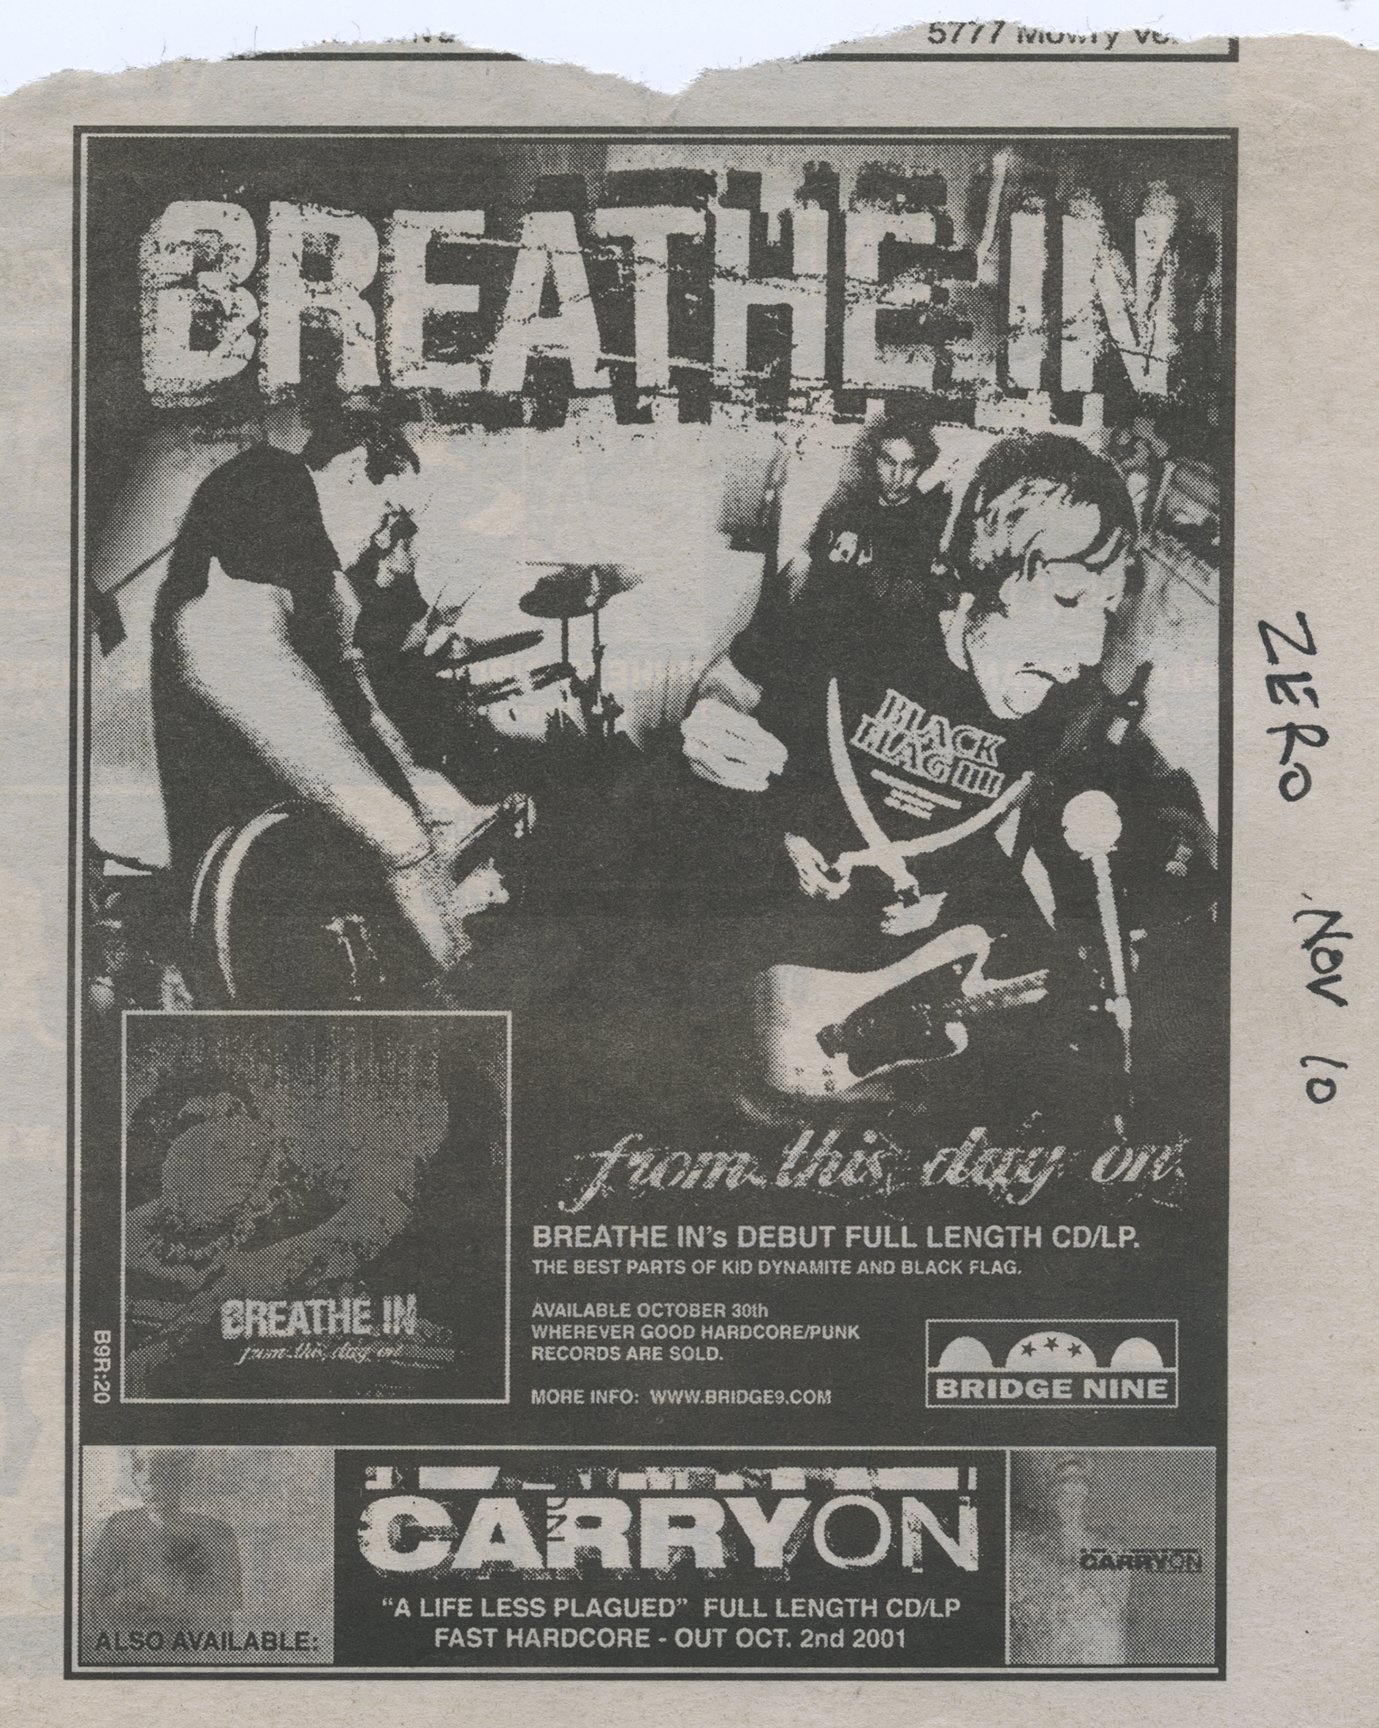 From This Day On Breathe In Bridge Nine Records